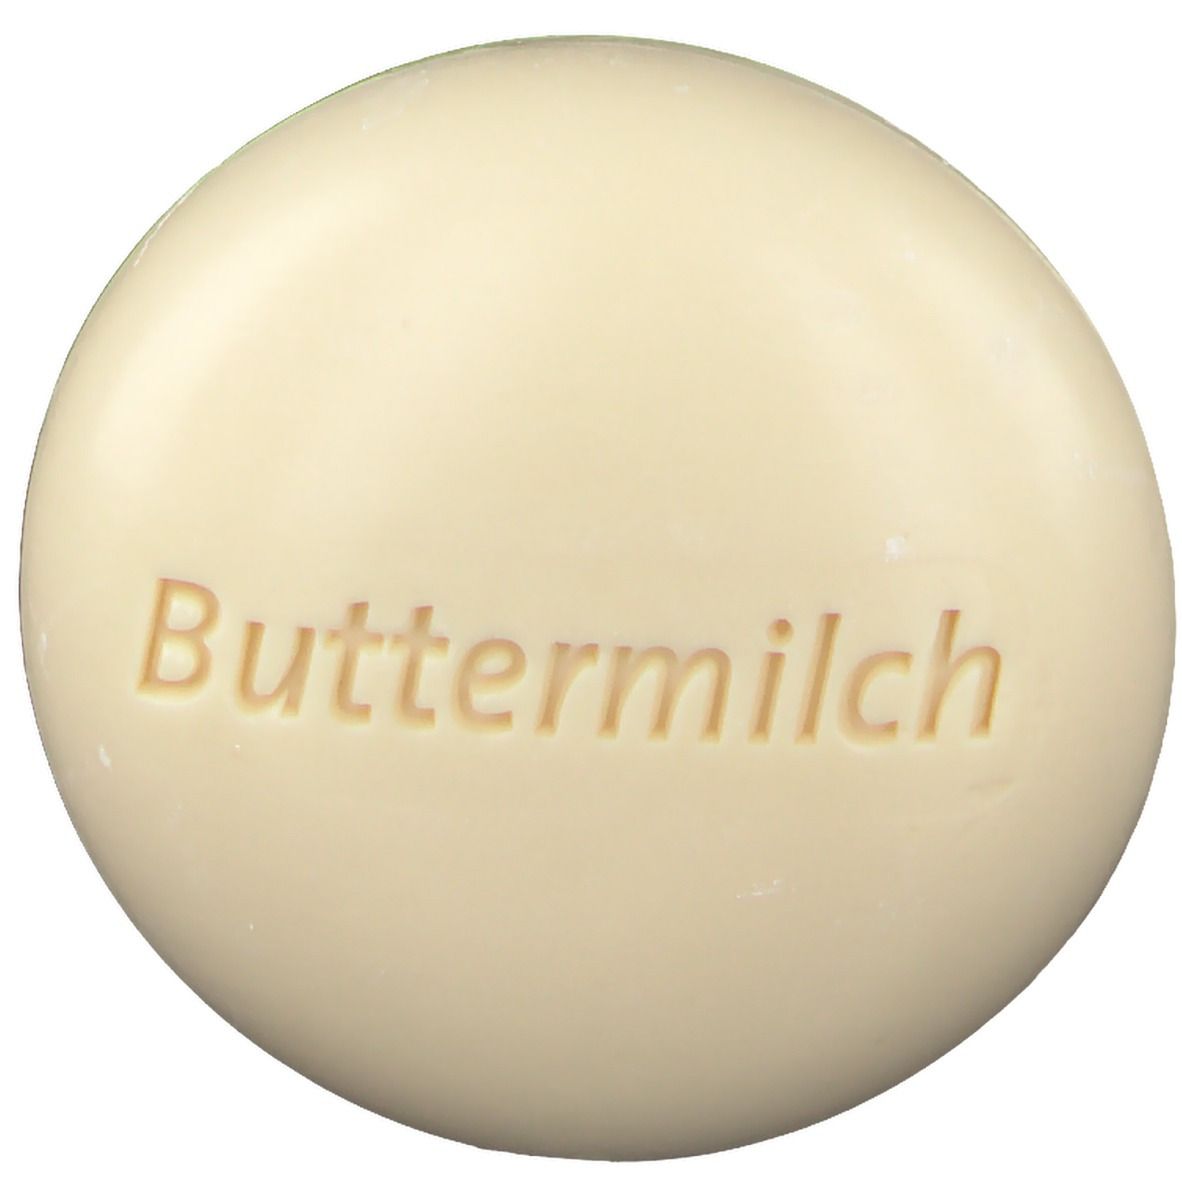 Made by SPEICK Bade & Duschseife Buttermilch-Seife